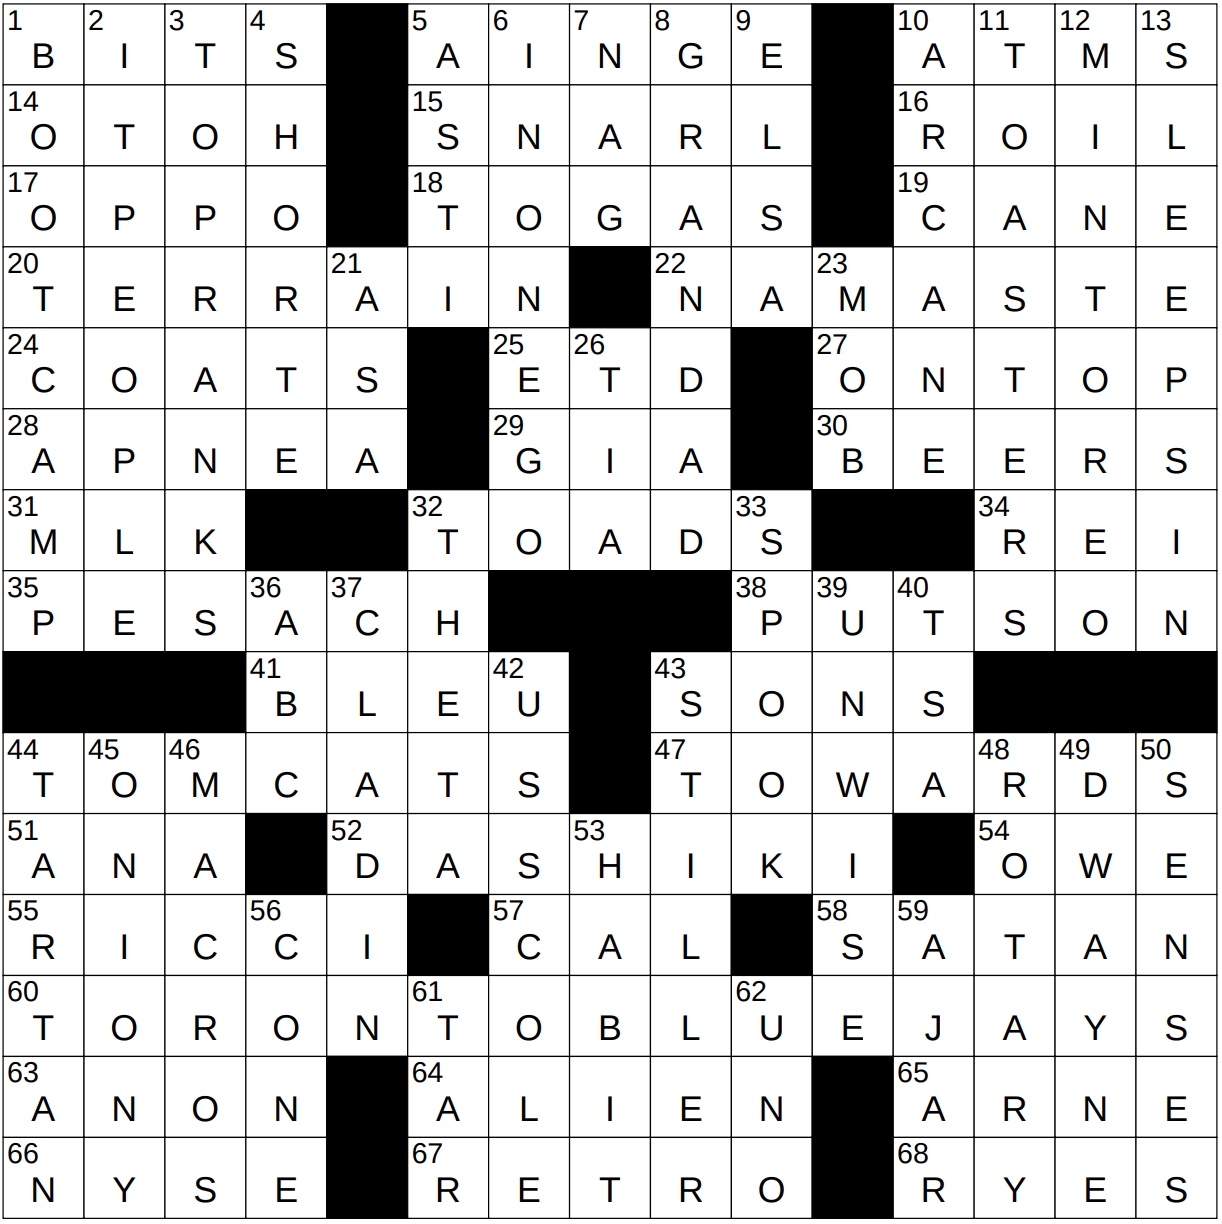 SPOILER ALERT: For the first time ever this term was used in The New York  Times crossword